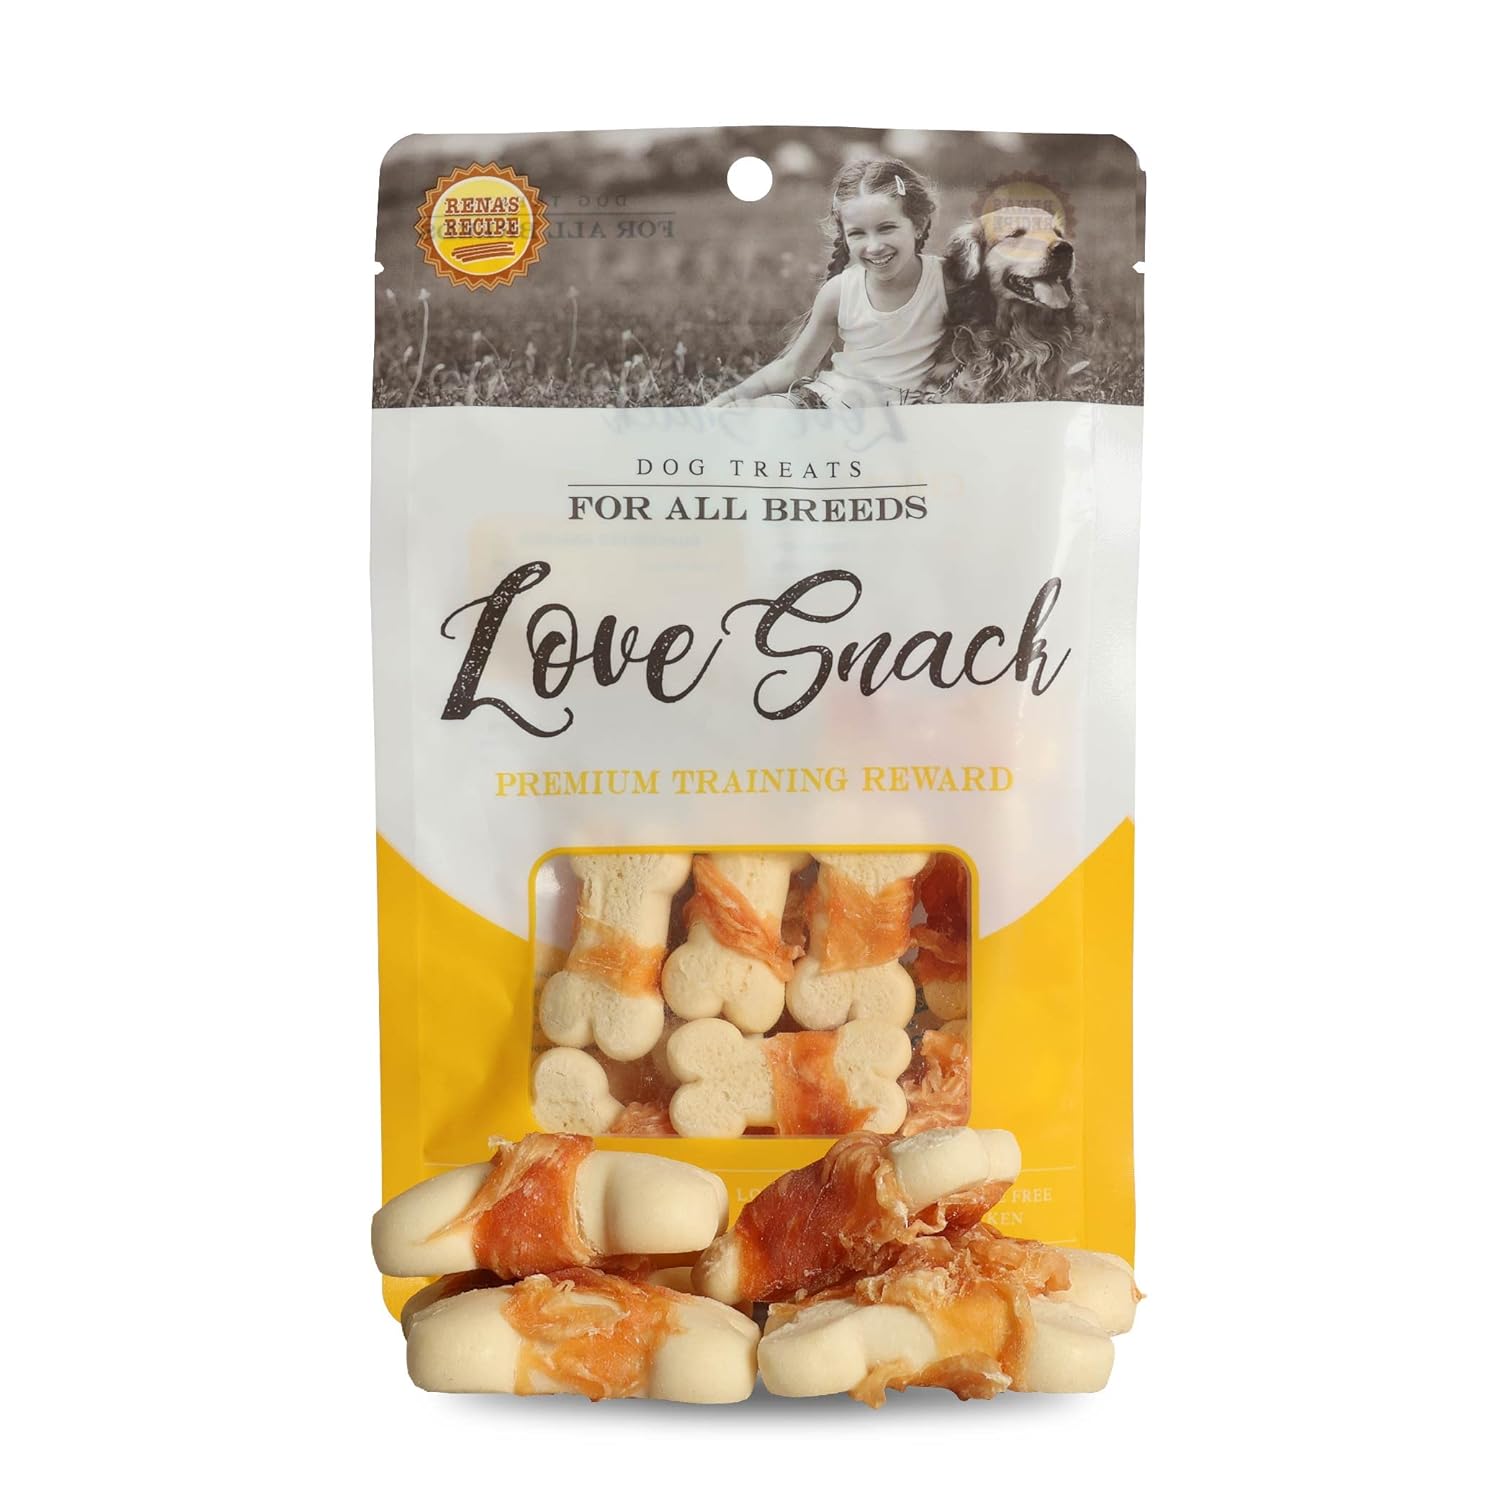 Rena's Love Snack Chicken Wrap Biscuit Dog Treat, for All Dog Breed, Easy to Digest, Low in Fat, 100% Cage Free Chicken, Rich in Protein, Training Treats, 120g (Pack of 2)…